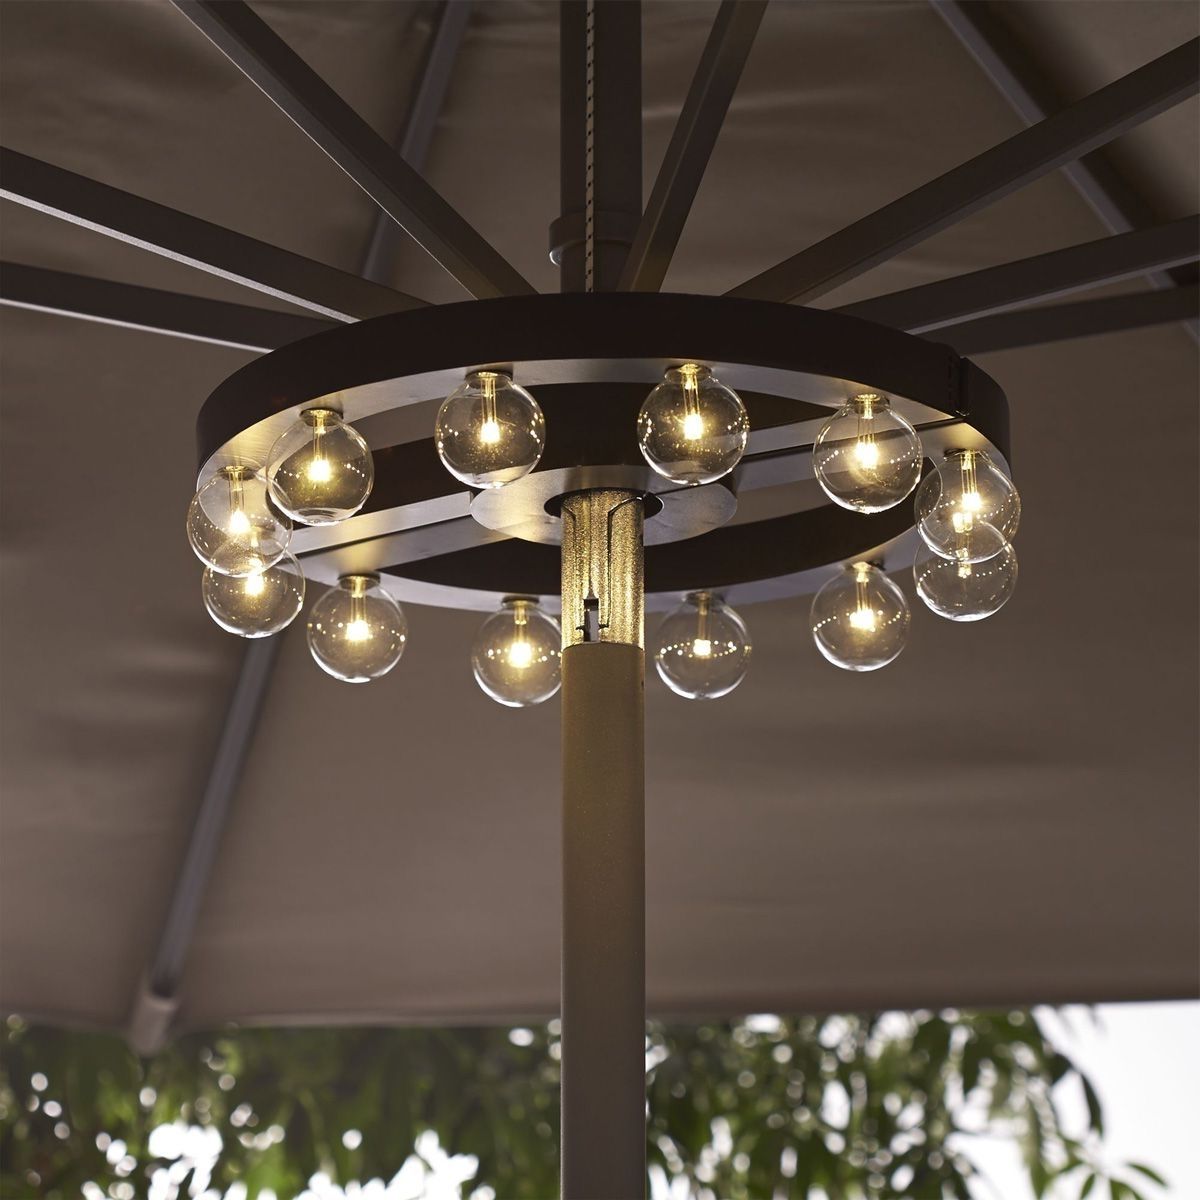 Patio Umbrella Marquee Lights (View 2 of 20)